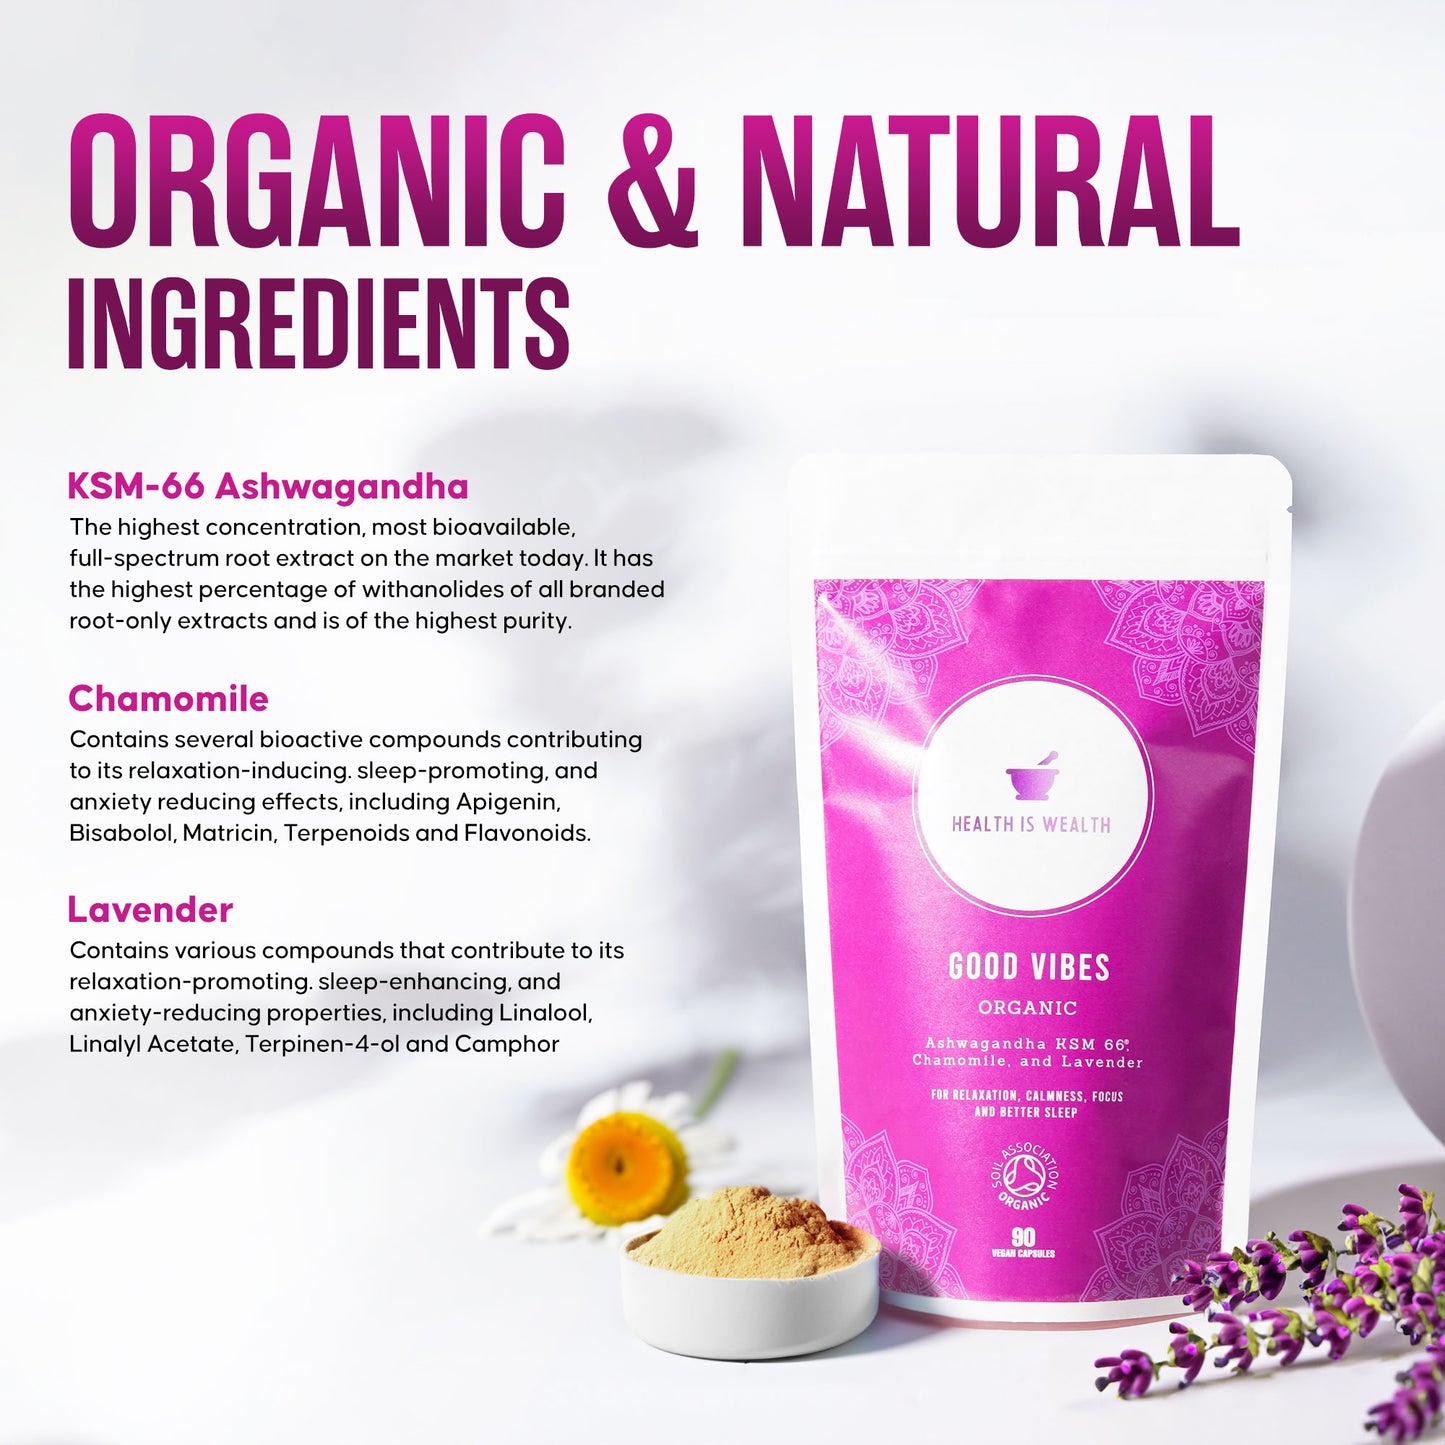 
                  
                    The image highlights "Good Vibes - Natural Stress Relief Supplement", an organic stress management supplement by Health is Wealth. It details the organic and natural ingredients as well as the benefits of KSM-66 Ashwagandha, Chamomile, and Lavender, known for their relaxation and sleep-promoting qualities, set against a clean background with a purple pack and scattered lavender flowers.
                  
                